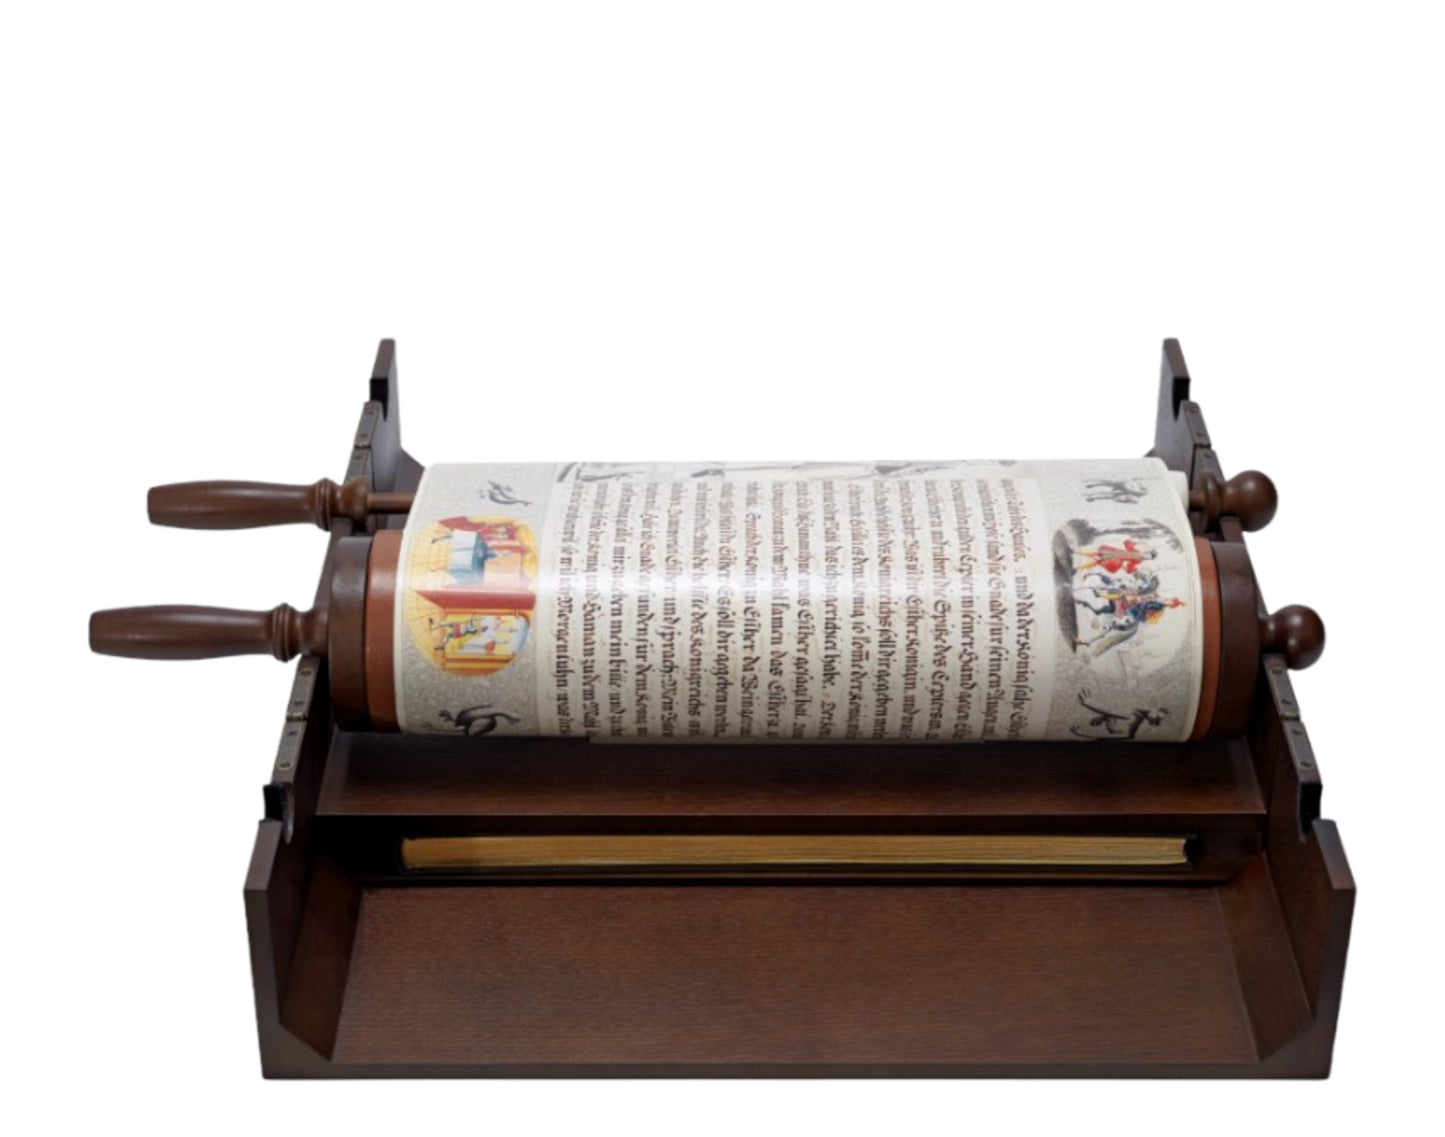 Taschen Books - The Esther Scroll Manuscript In Wooden Display